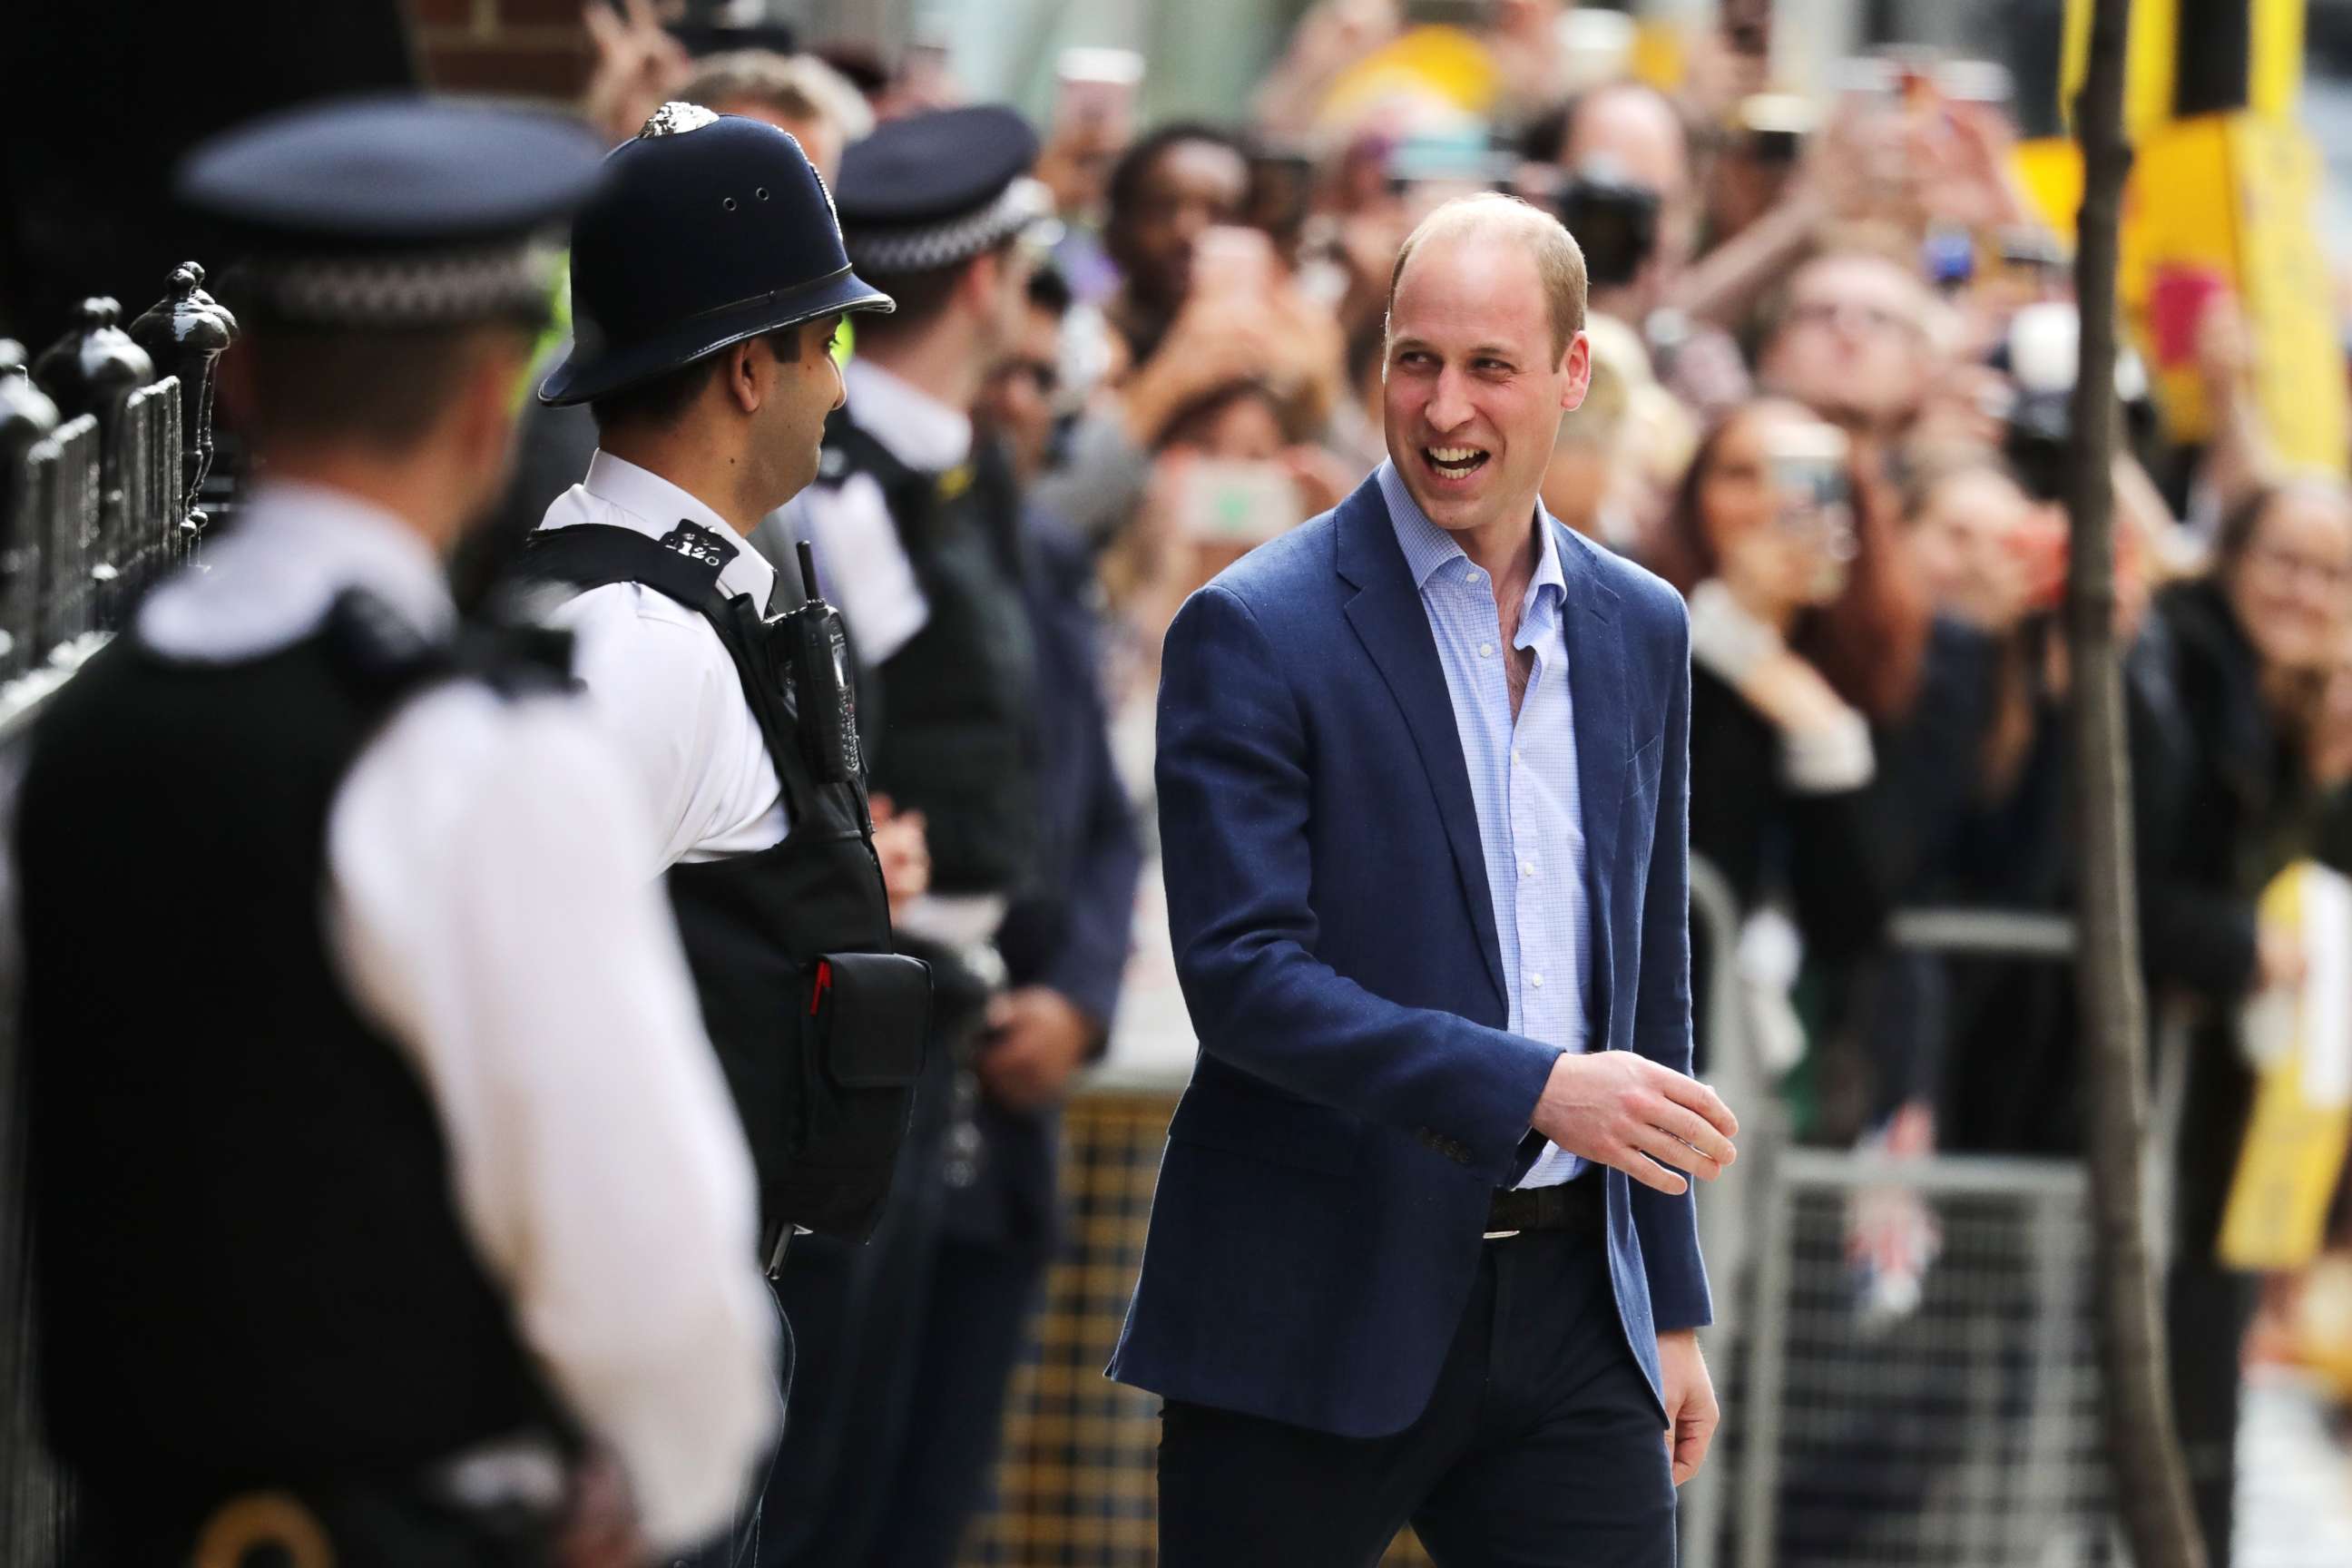 PHOTO: Prince William, Duke of Cambridge, leaves the Lindo Wing of St Mary's Hospital after Catherine, Duchess of Cambridge, gave birth to a baby boy on April 23, 2018 in London.